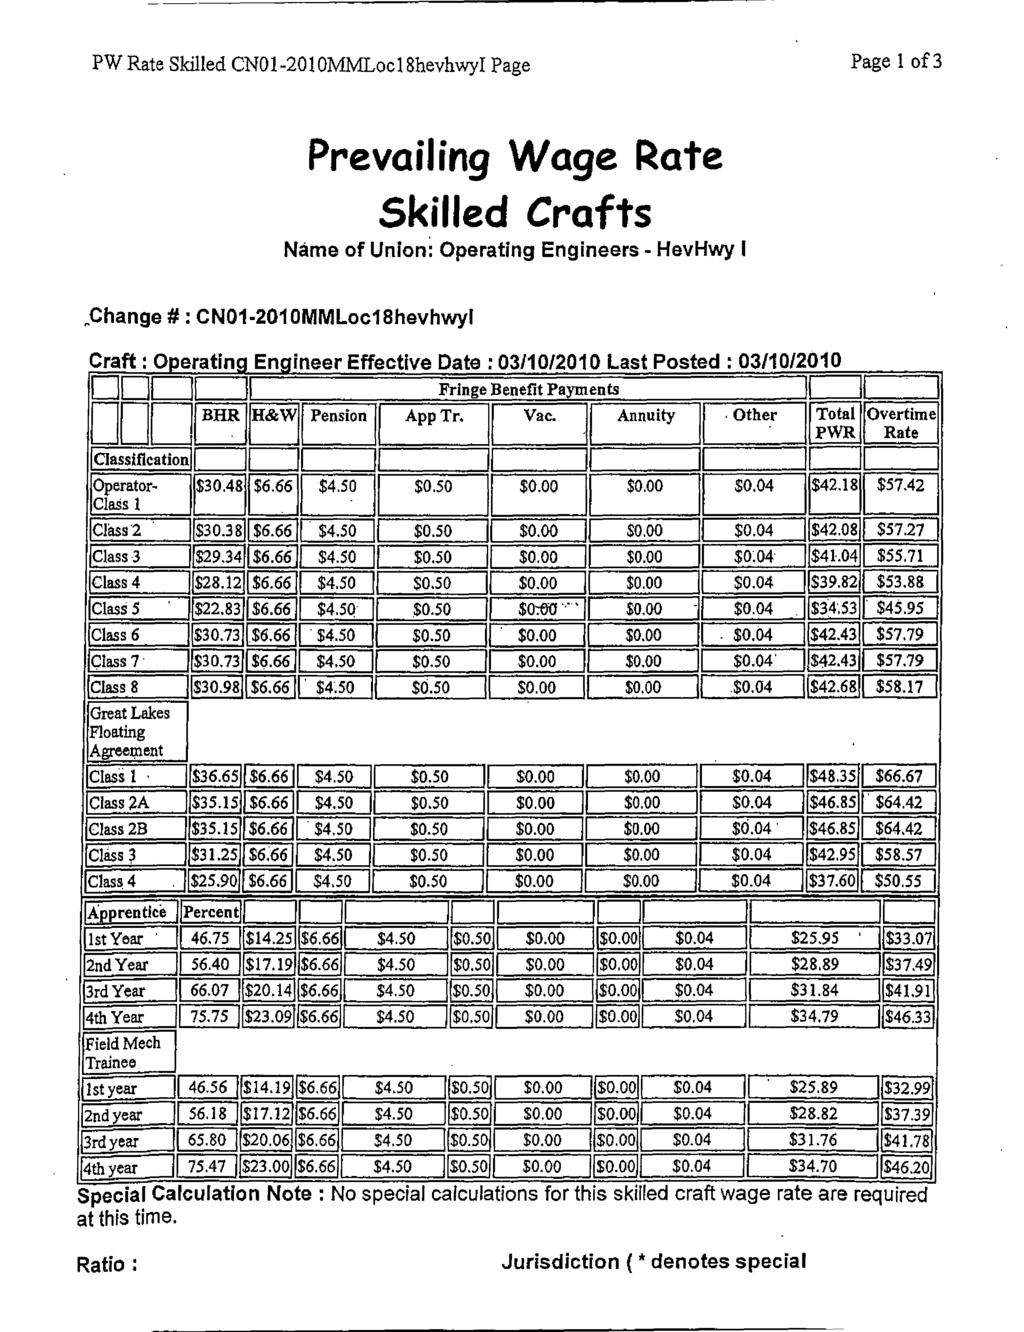 PW Rate Skilled CNO1-2010MMLoclThevhwyr Page Page 1 of 3 Prevailing Wage Rate Skilled Crafts Name of Union: Operating Engineers - HevHwy I Change #: CNO1-2010MMLocl8hevhwyl 1 An.